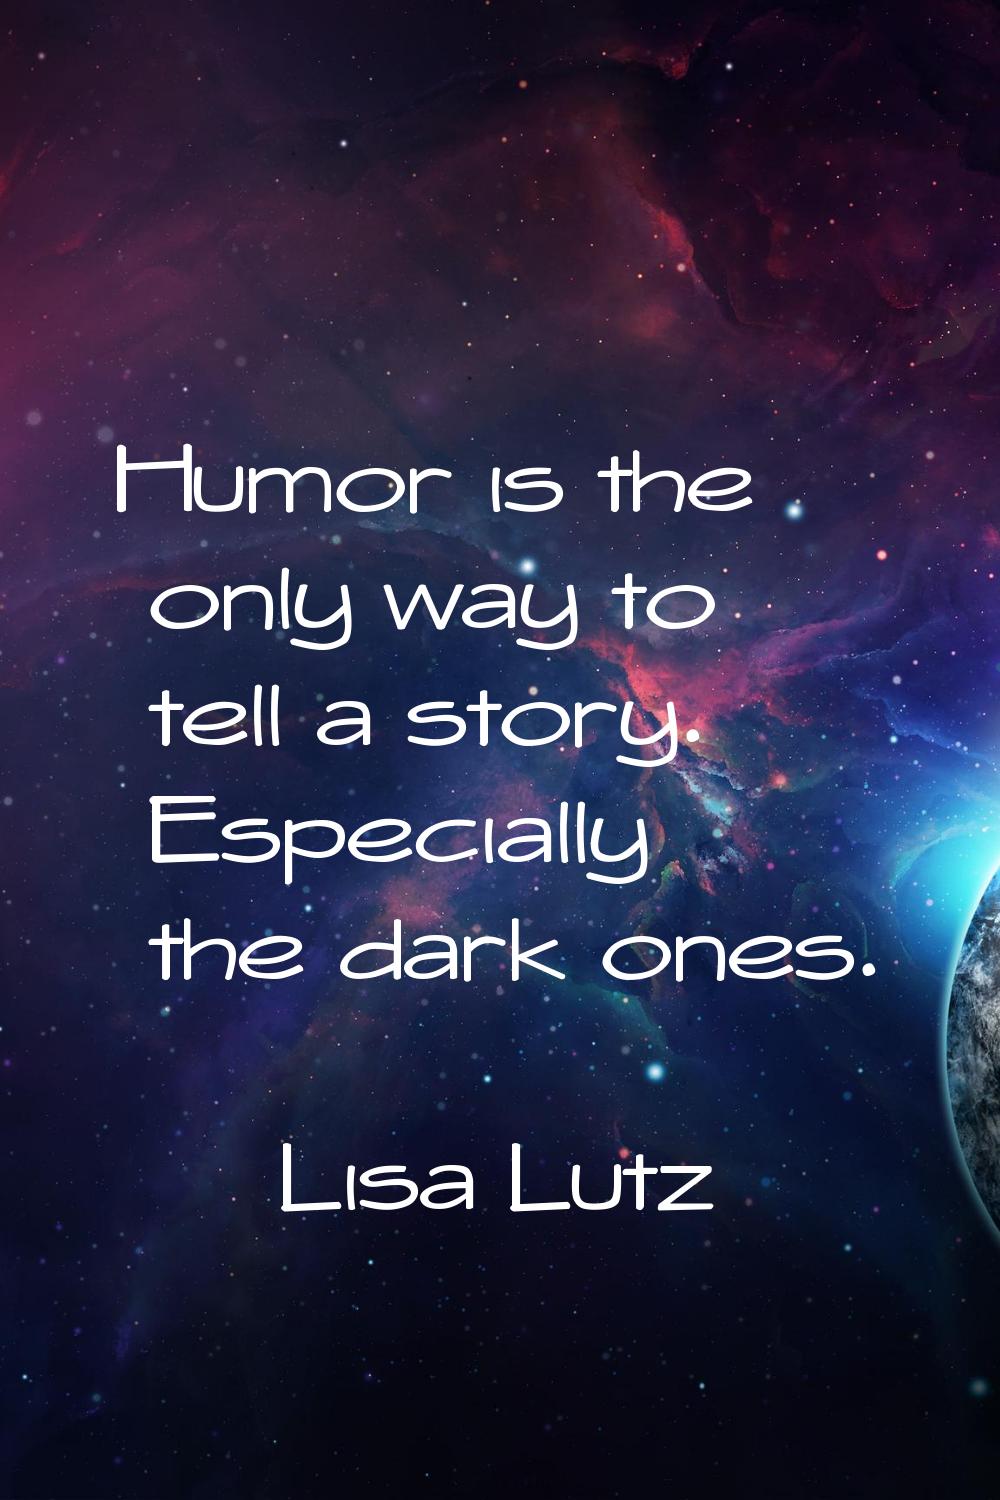 Humor is the only way to tell a story. Especially the dark ones.